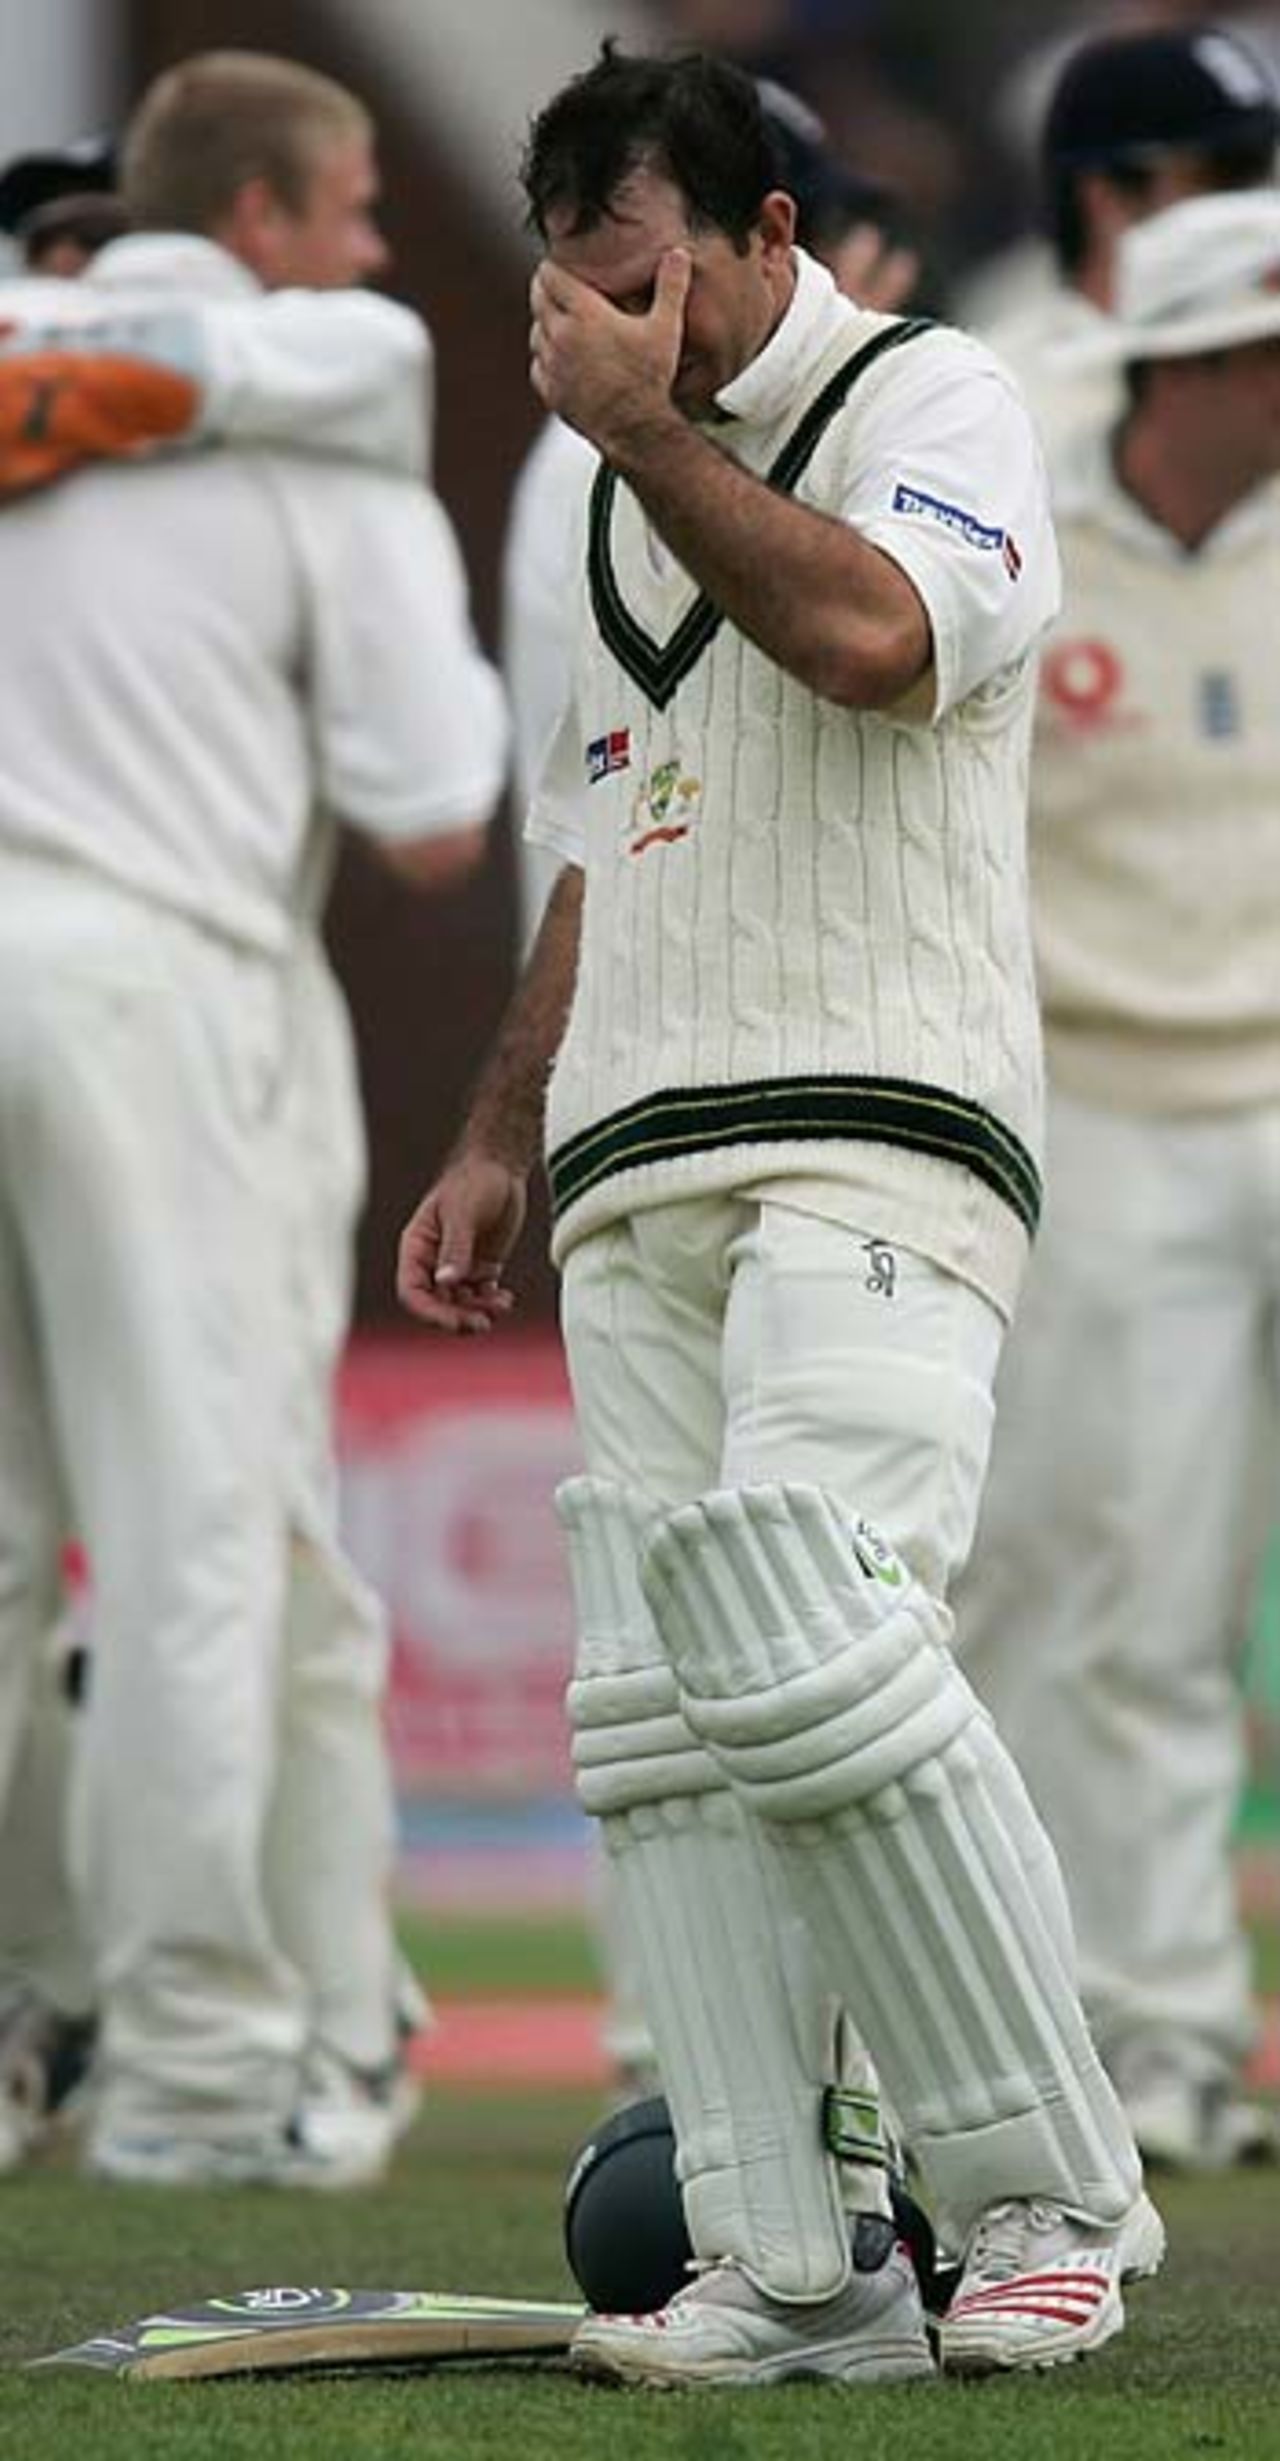 Ricky Ponting can't believe Steve Bucknor's decision in giving Damien Martyn out, England v Australia, 3rd Test, Old Trafford, August 15, 2005